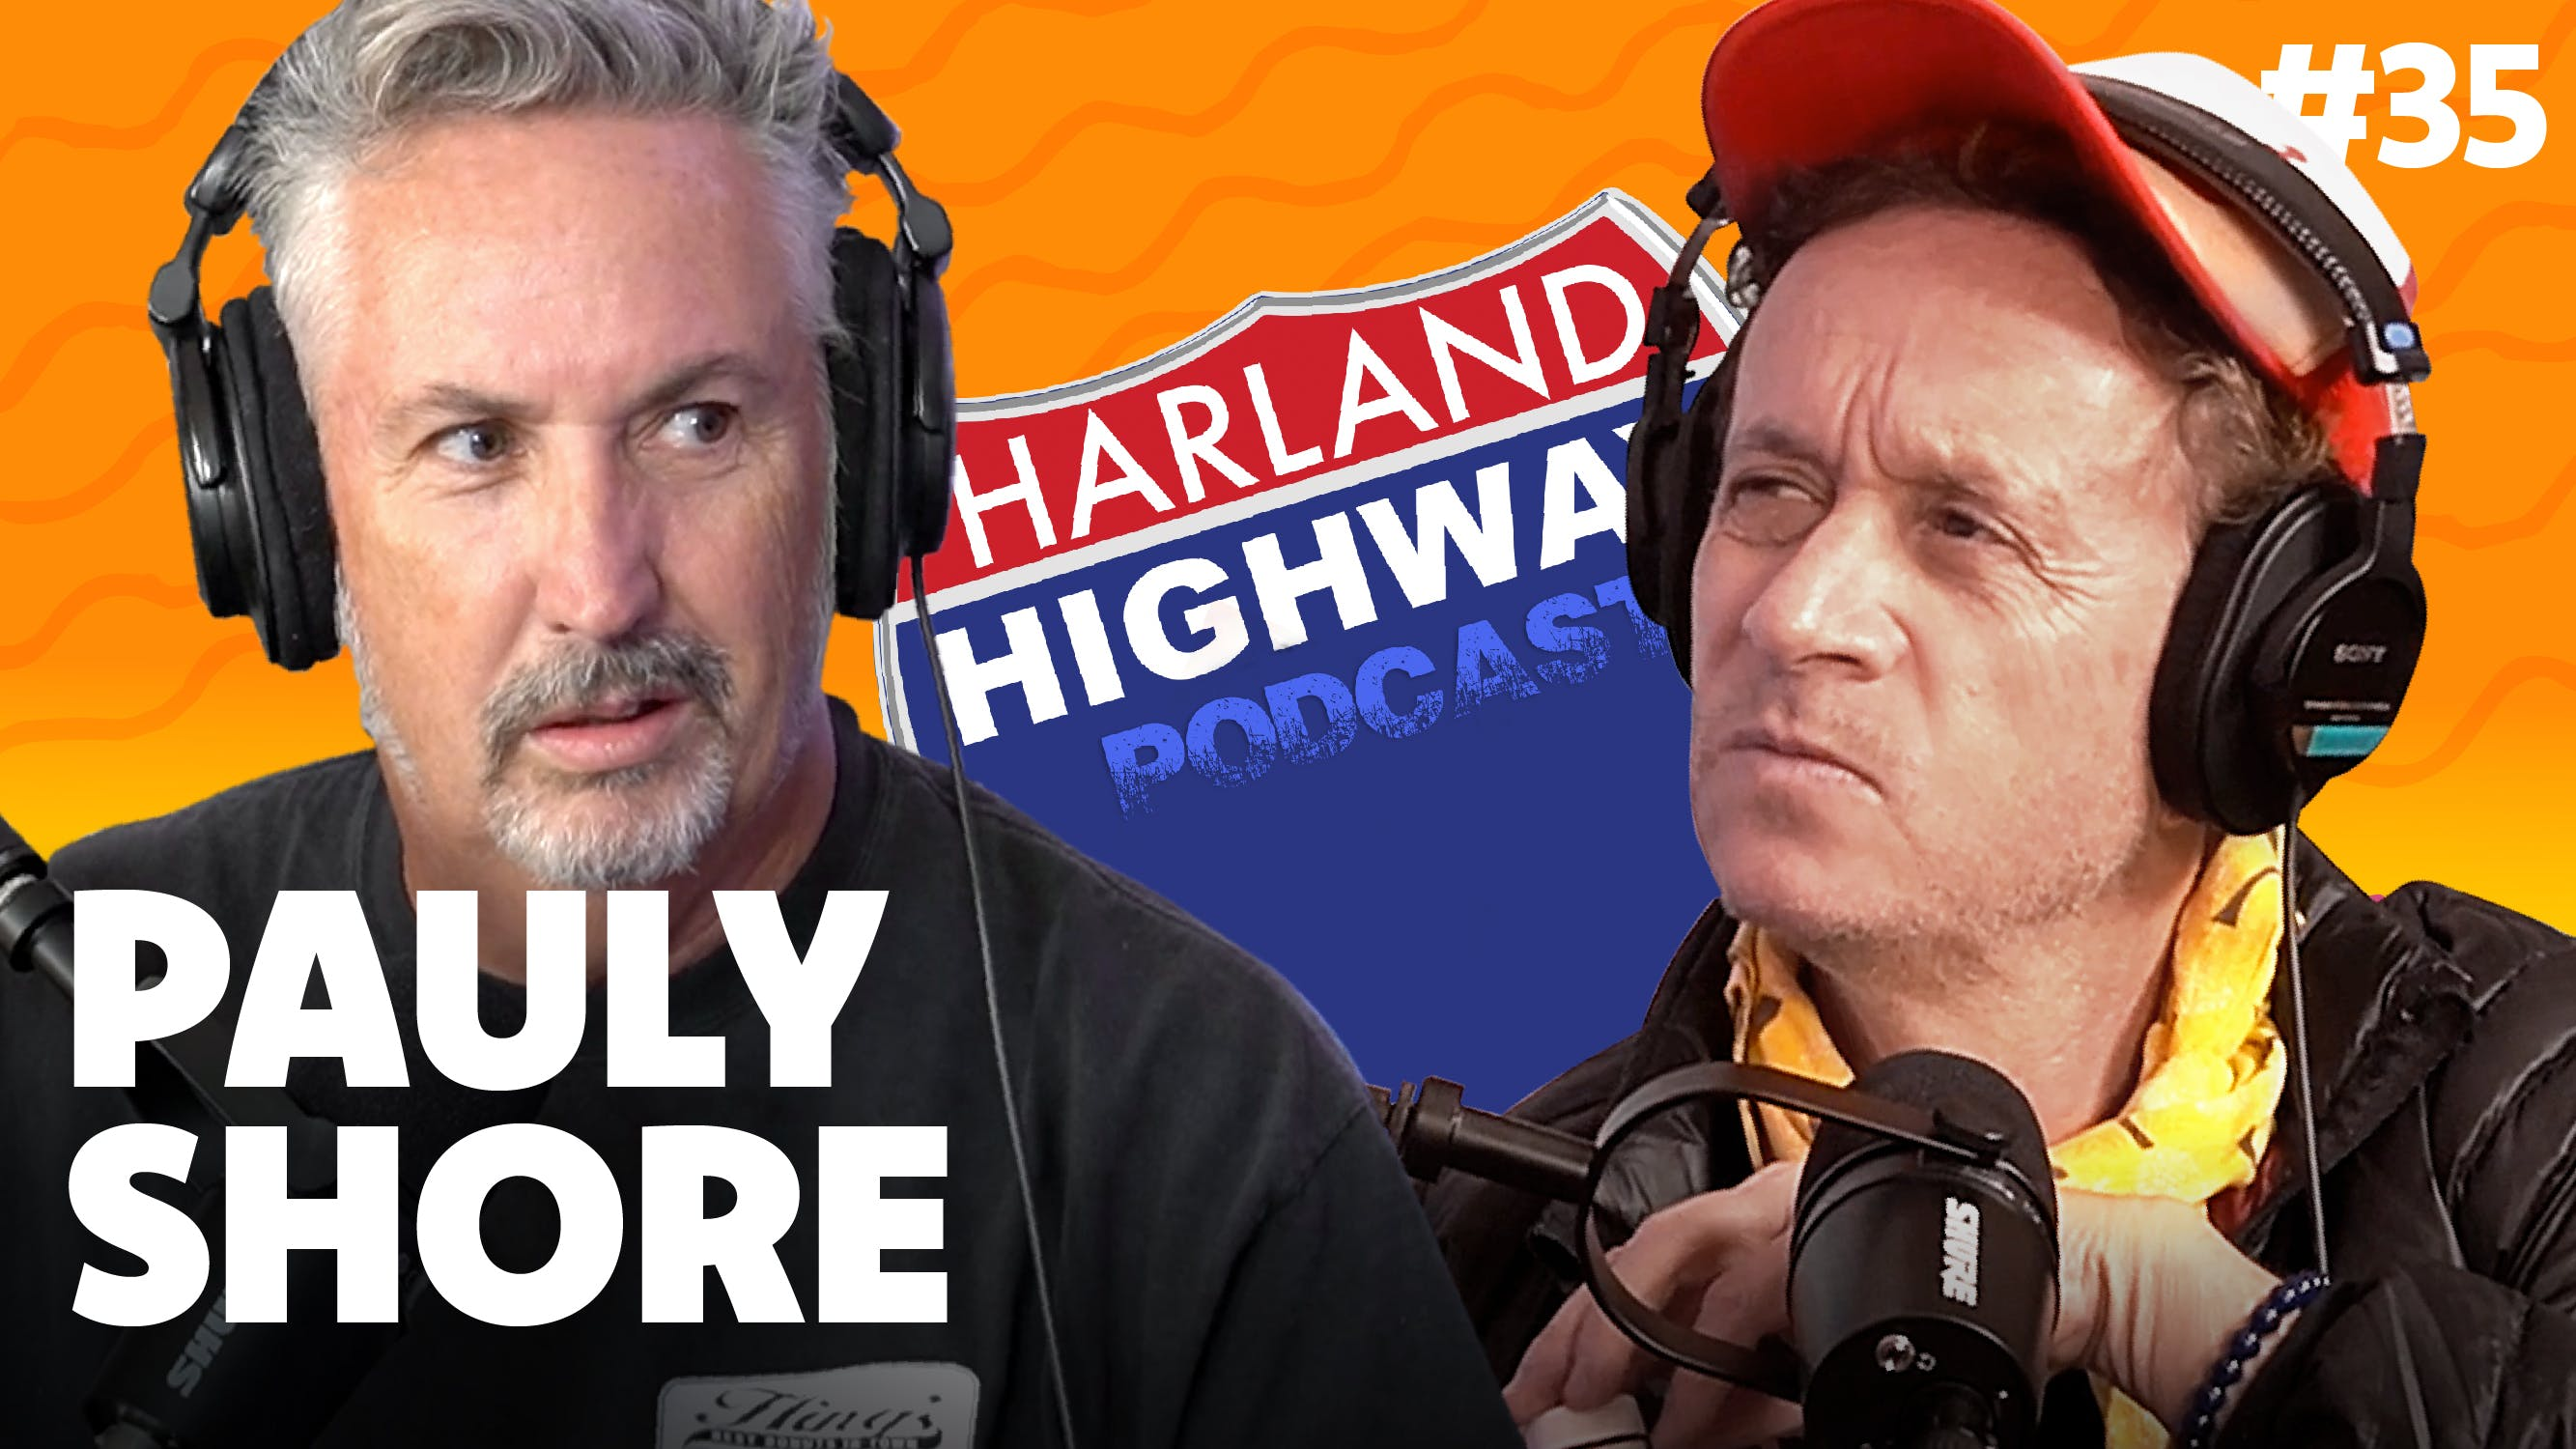 NEW HARLAND HIGHWAY #35 -PAULY SHORE, Comedian, Actor